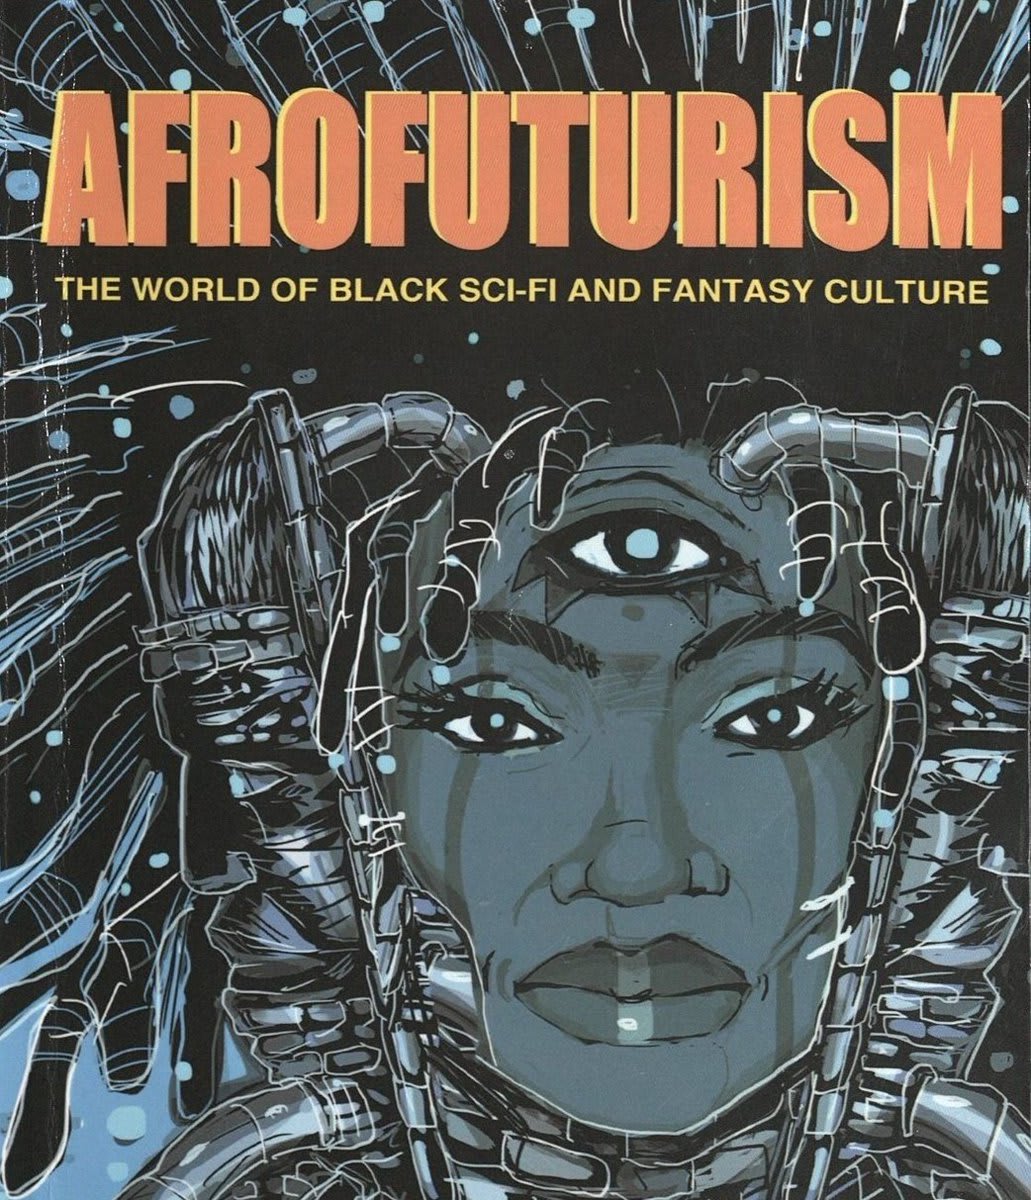 The term Afrofuturism was introduced in 1993 by scholar Mark Dery, but it's been a part of art, literature, and music almost since the birth of modern science fiction at the beginning of the 19th century. Explore more in the stacks in Watson Library: